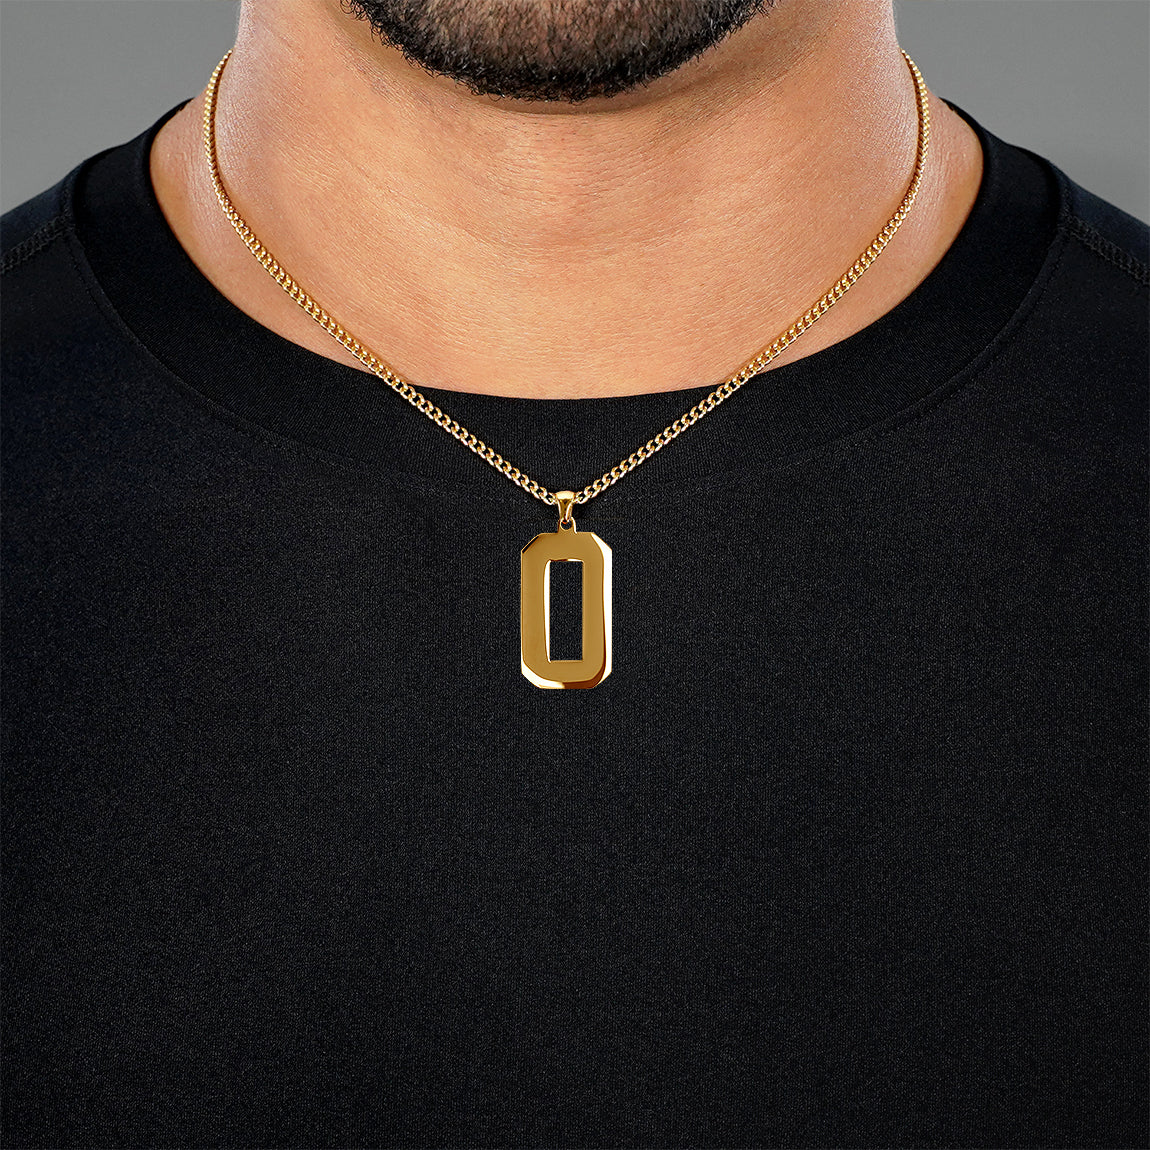 O Letter Pendant with Chain Necklace - Gold Plated Stainless Steel